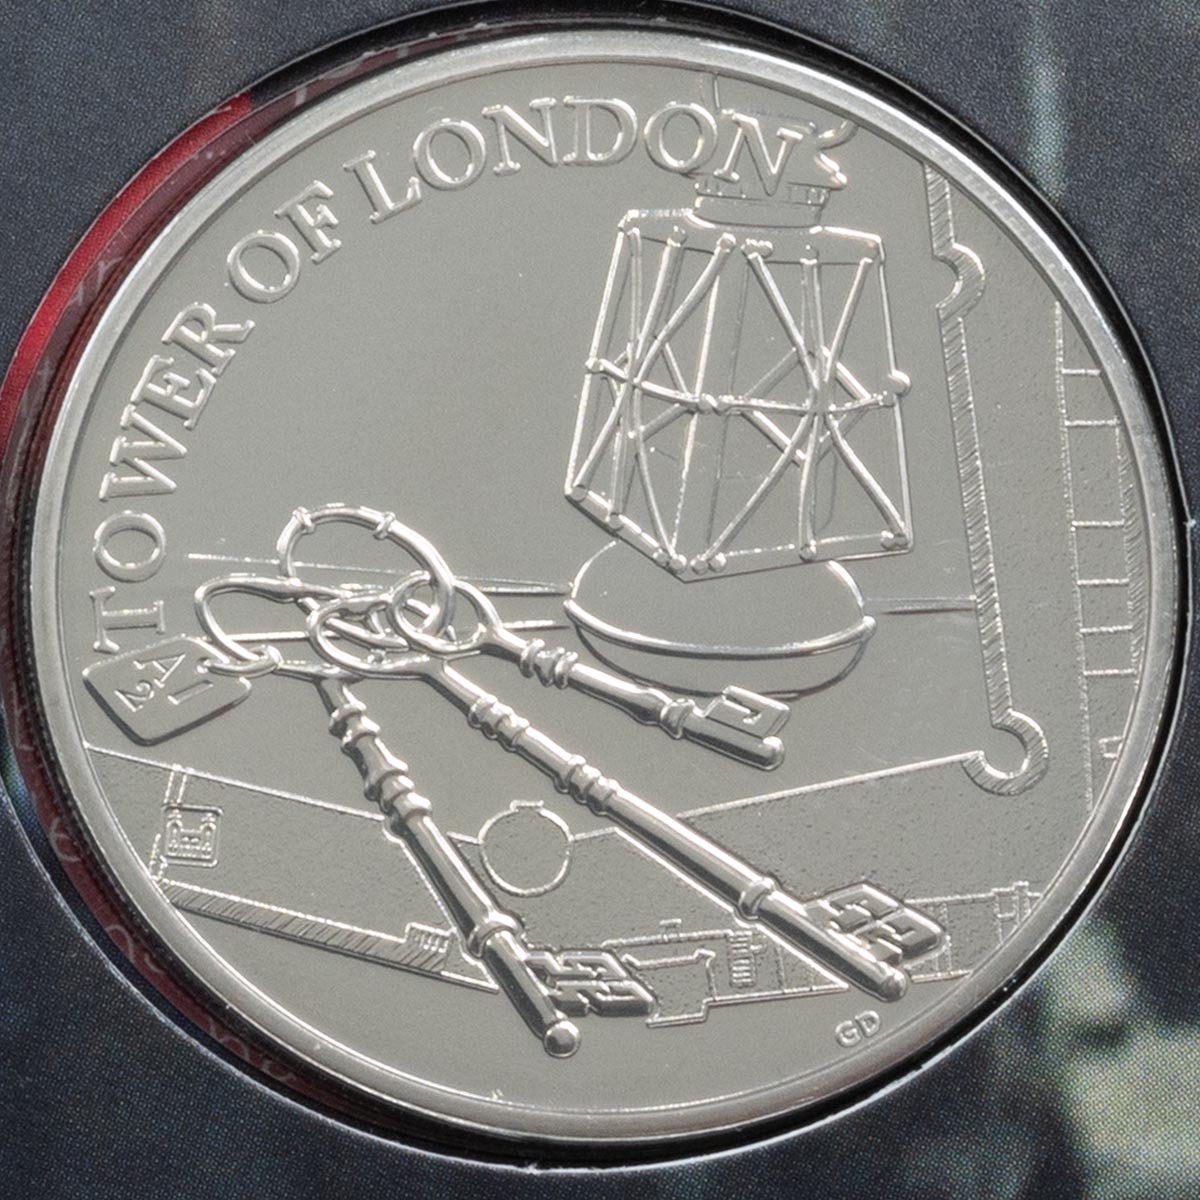 uk19ckbu-2019-tower-of-london-ceremony-of-the-keys-brilliant-uncirculated-five-pound-coin-001-m